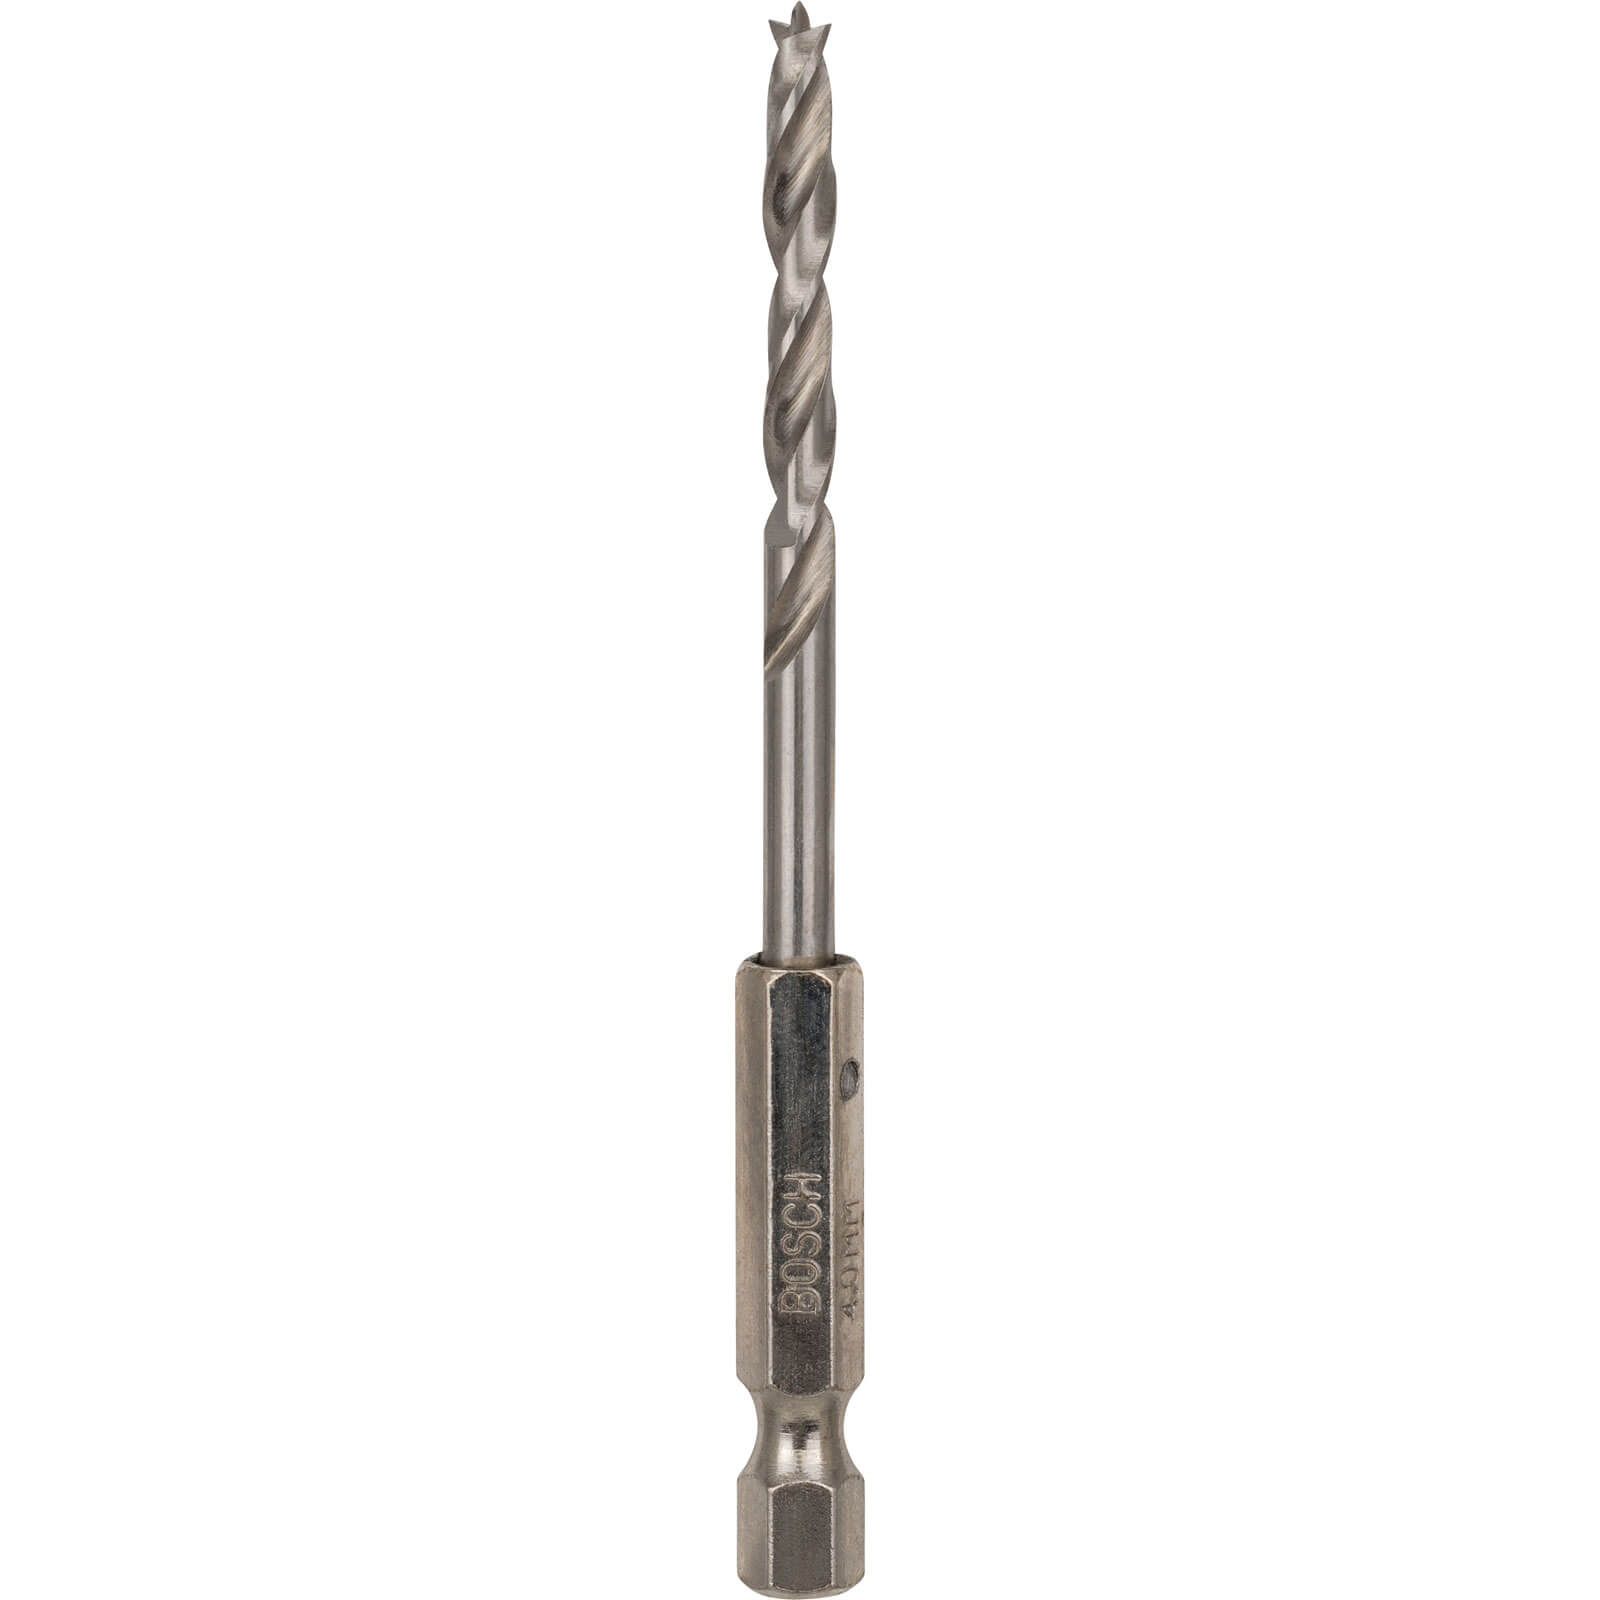 Photo of Bosch Hex Shank Drill Bit For Wood 4mm